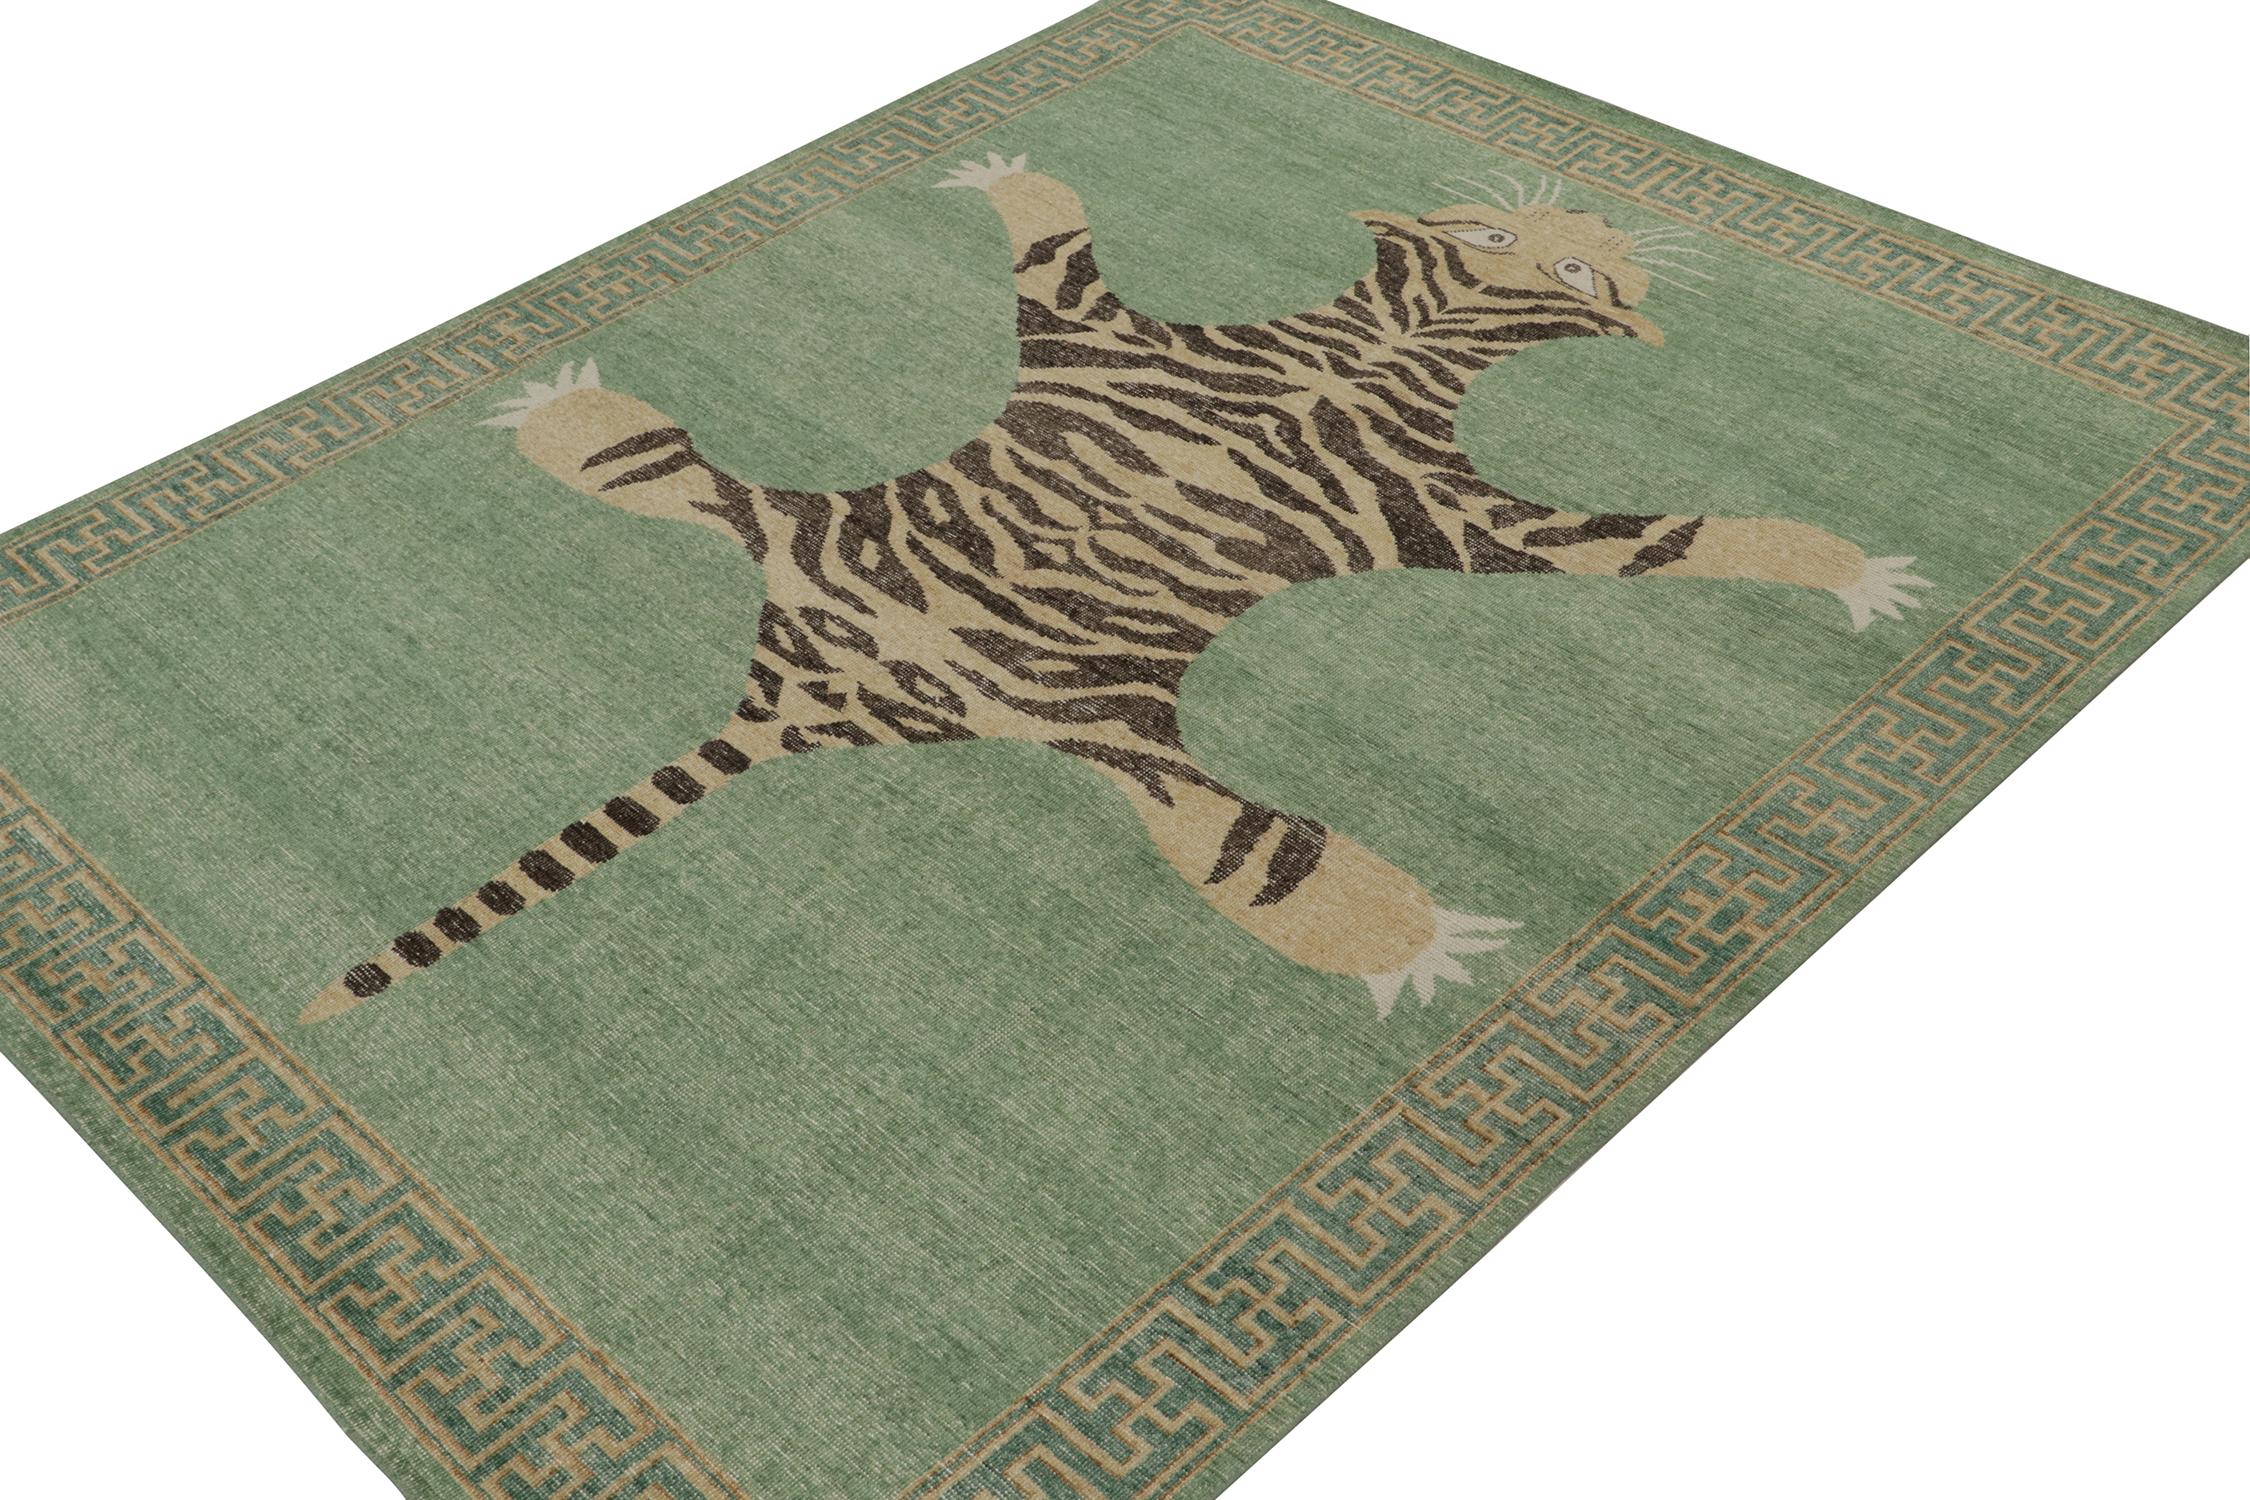 This 8x10 rug is a new addition to Rug & Kilim’s Homage Collection, that recaptures the time-honored Tiger skin rug design.

Further On the Design: 

This particular piece is inspired by antique Indian Tiger-skin rugs of the most regal, inviting